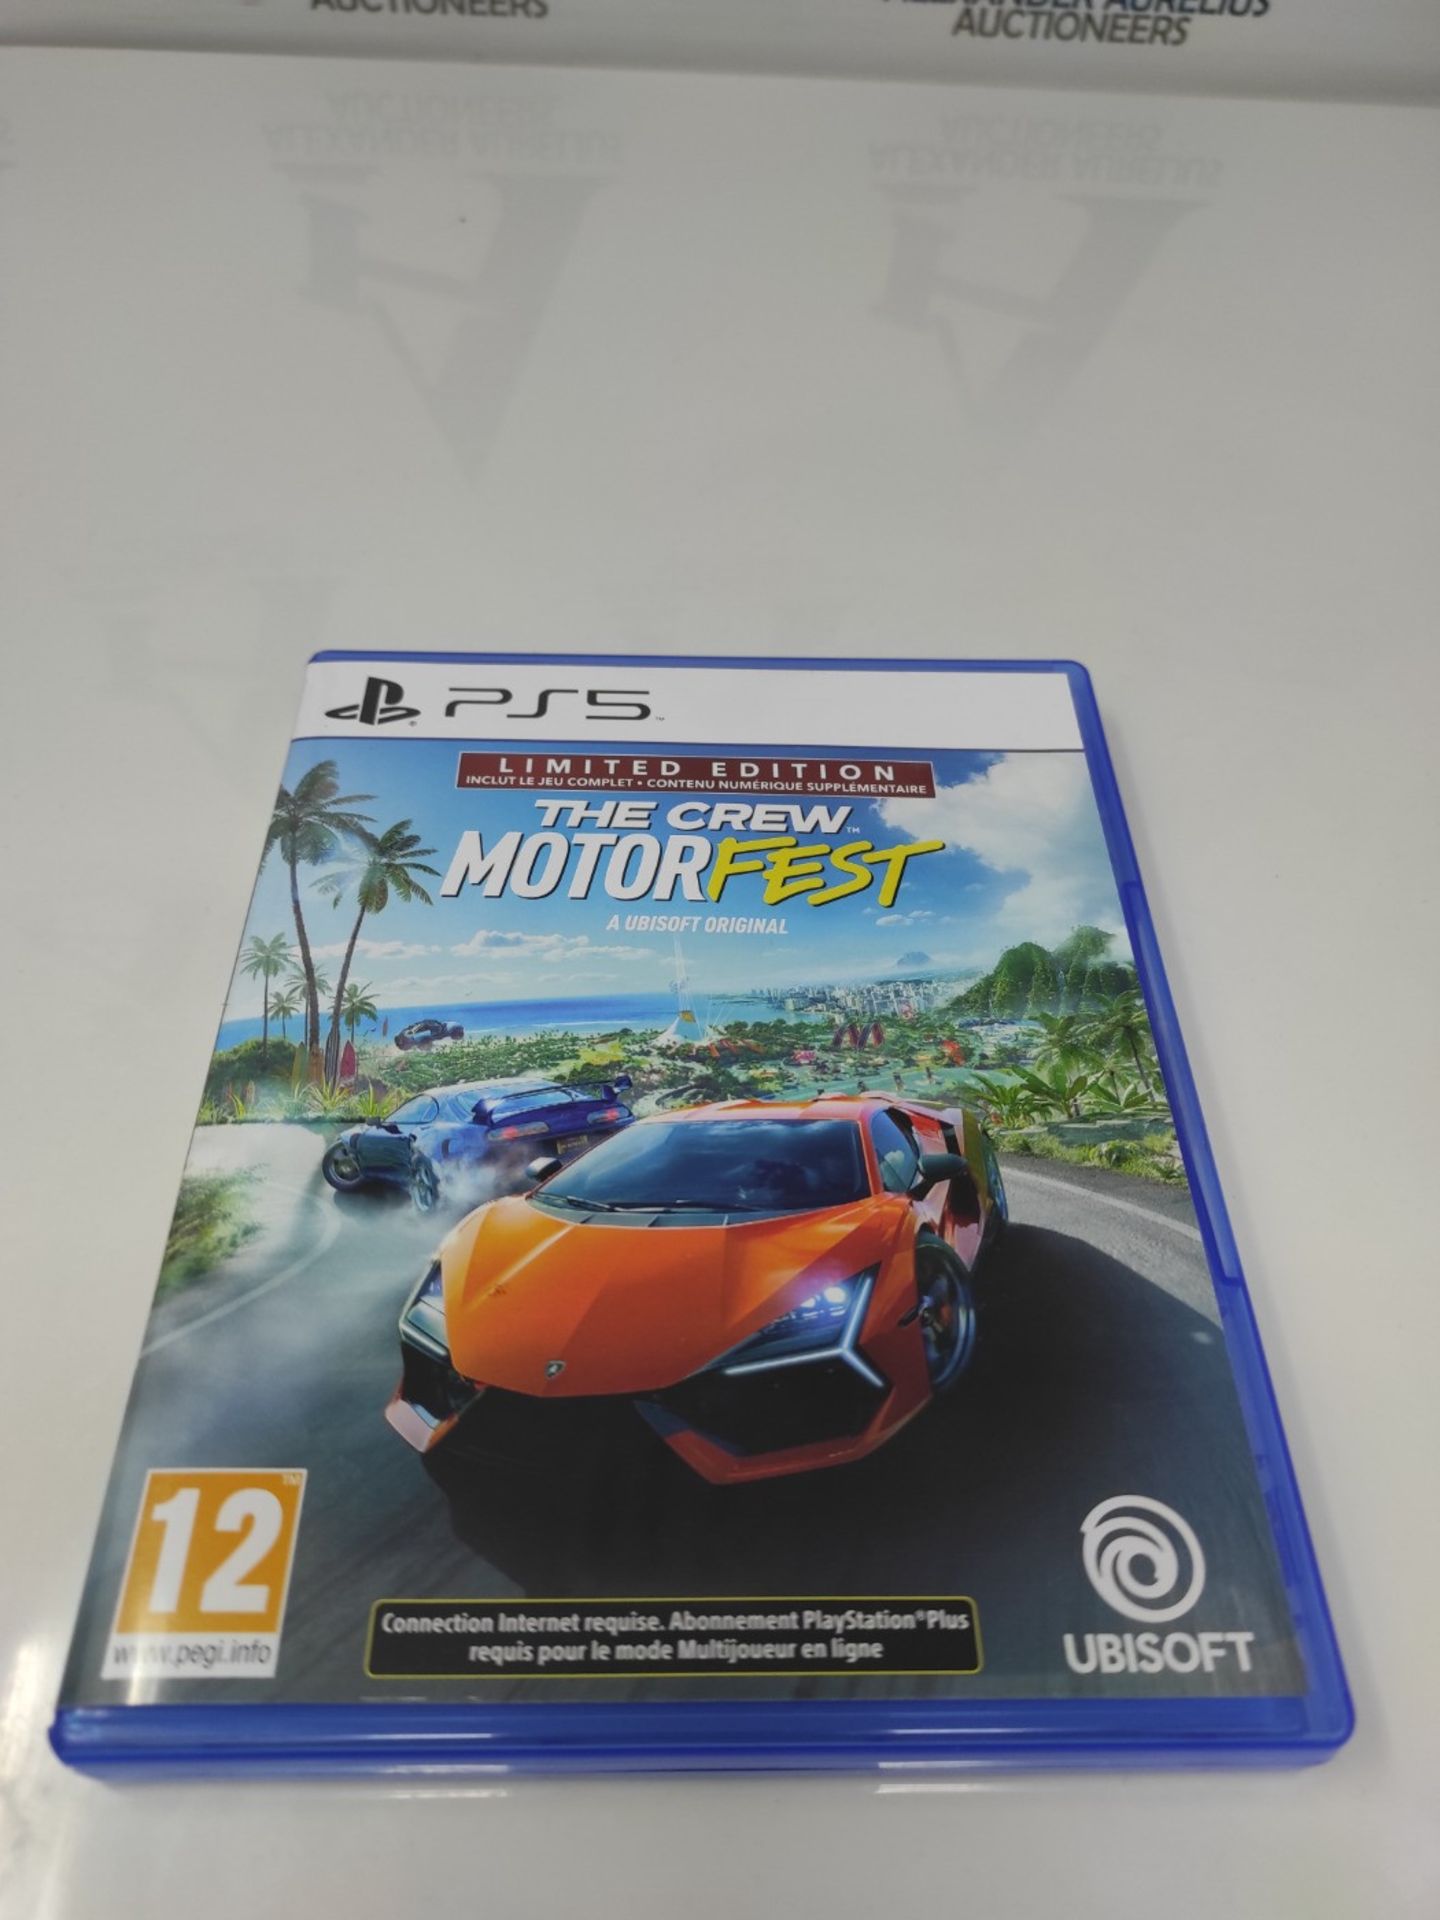 The Crew Motorfest Limited Edition for PS5 - Image 5 of 6